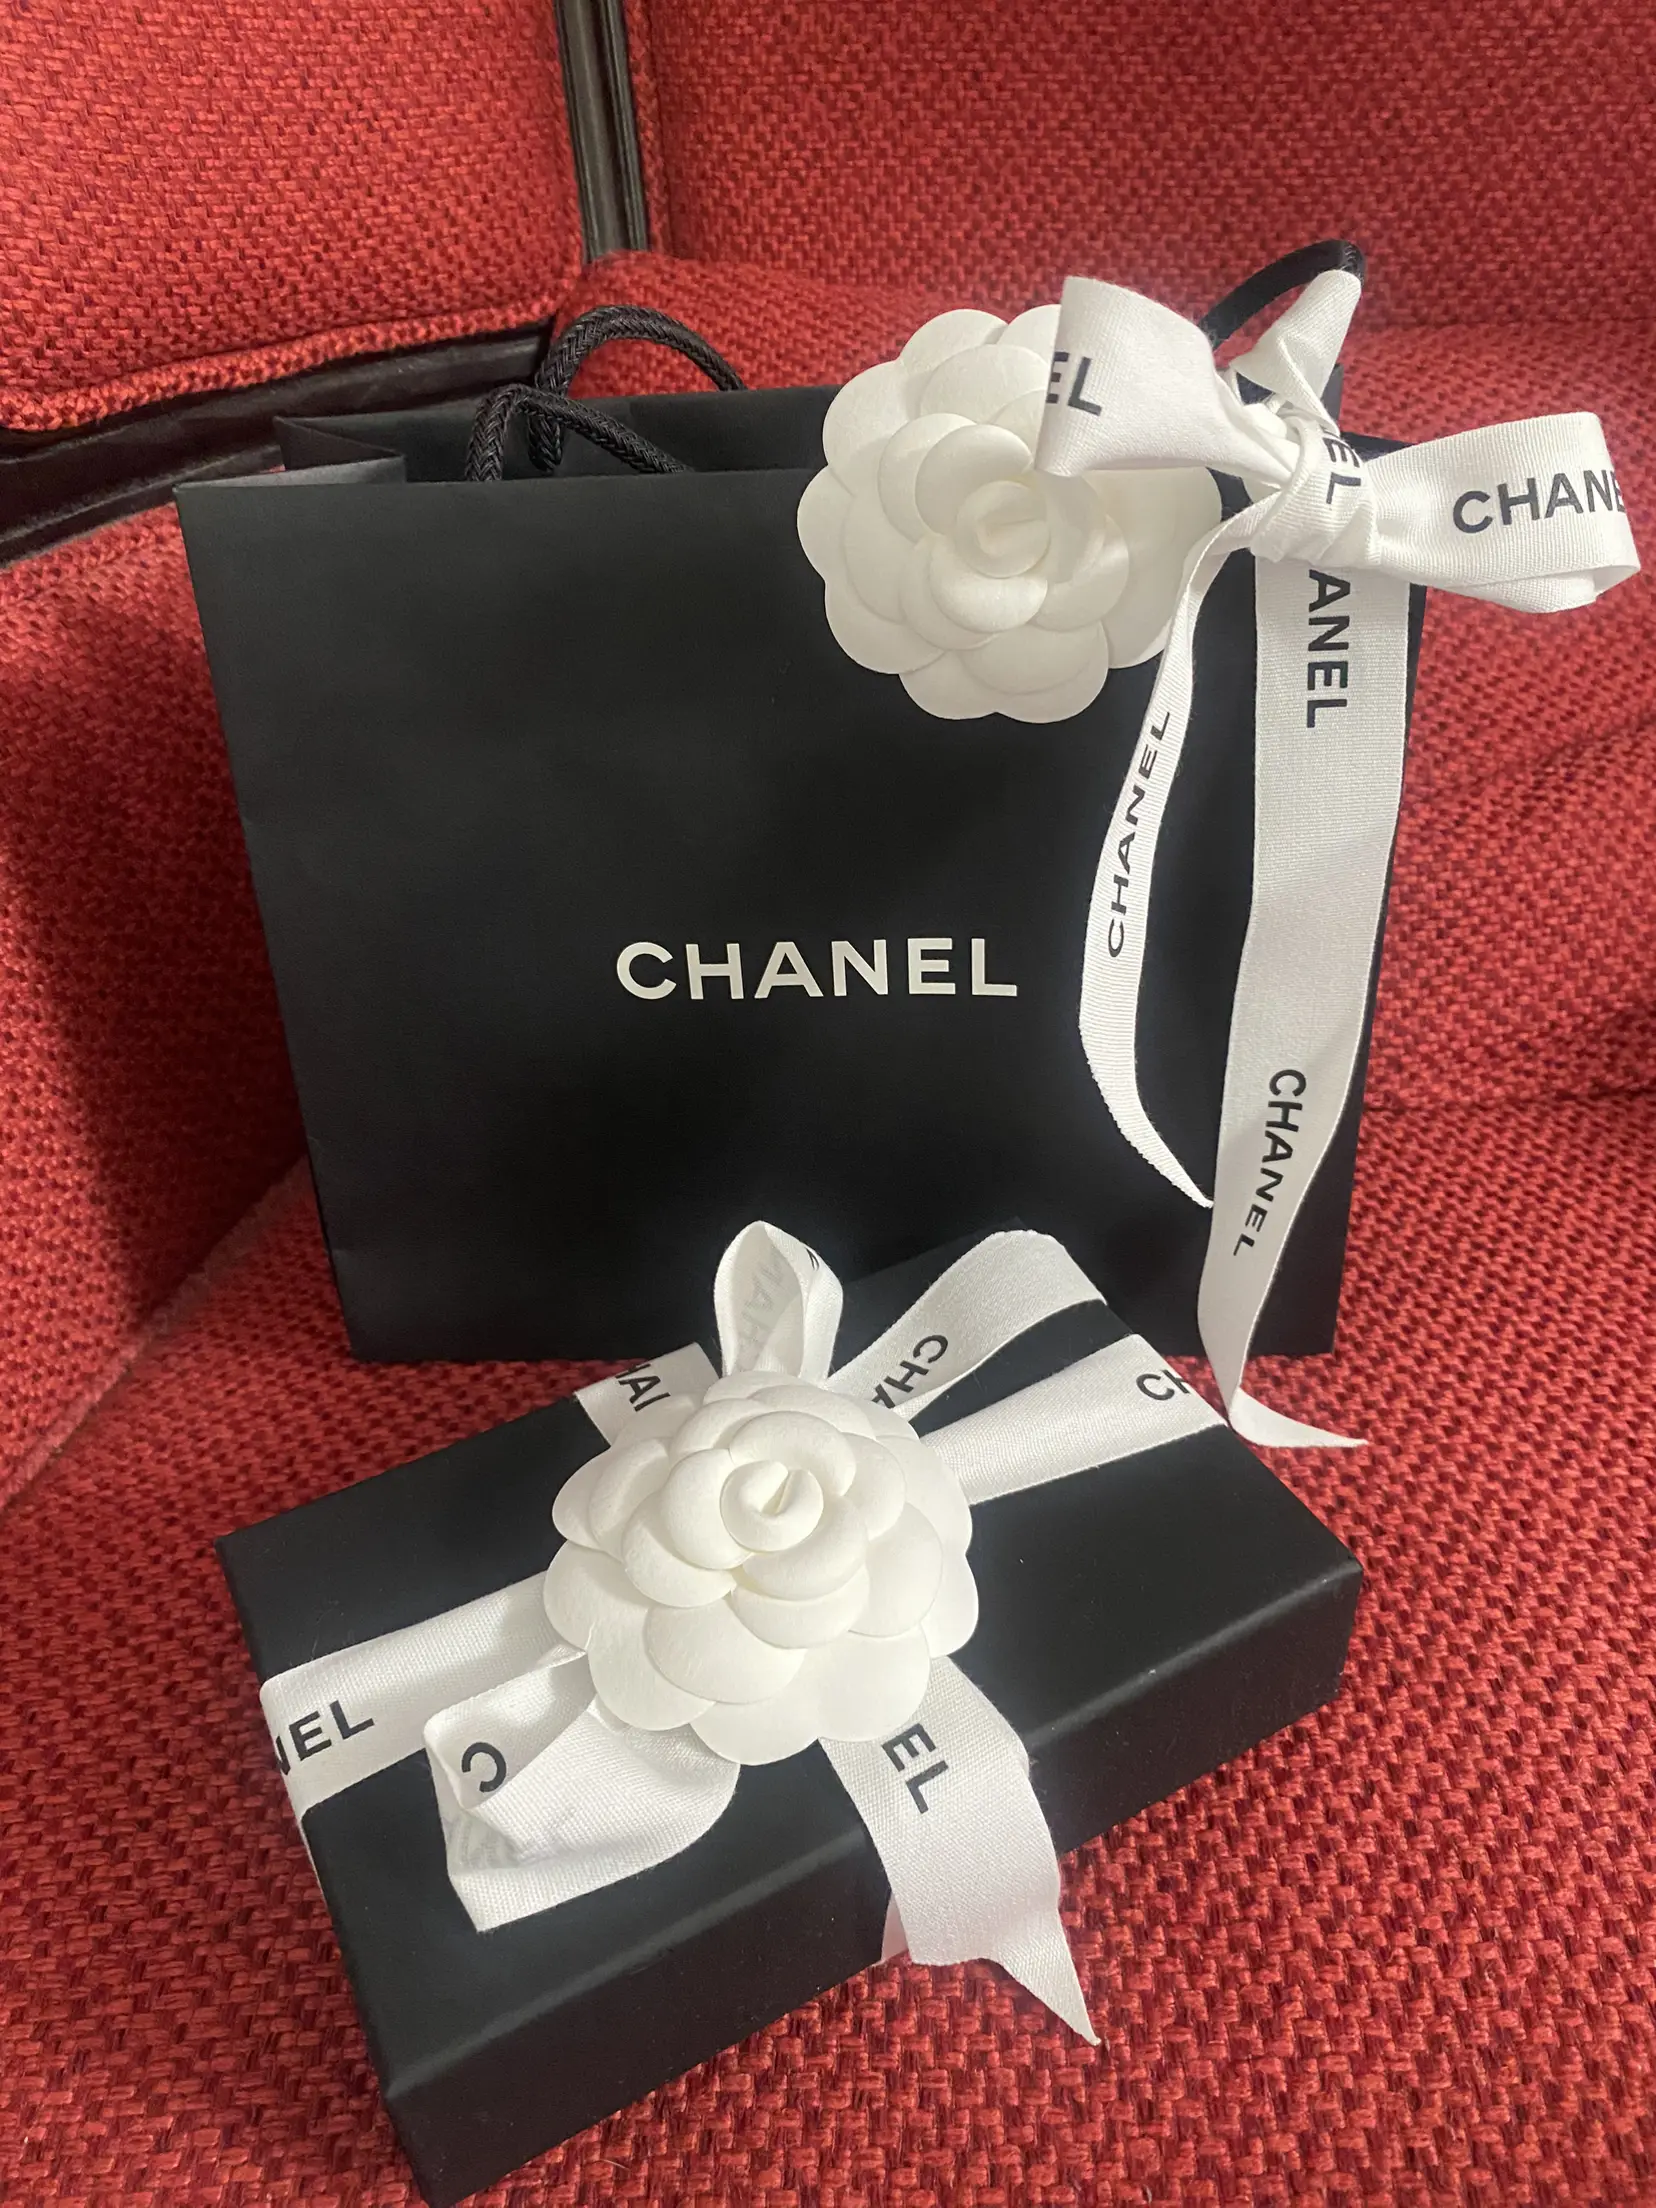 Chanel gift shopping paper bags/ribbons/Camellia flowers, Luxury